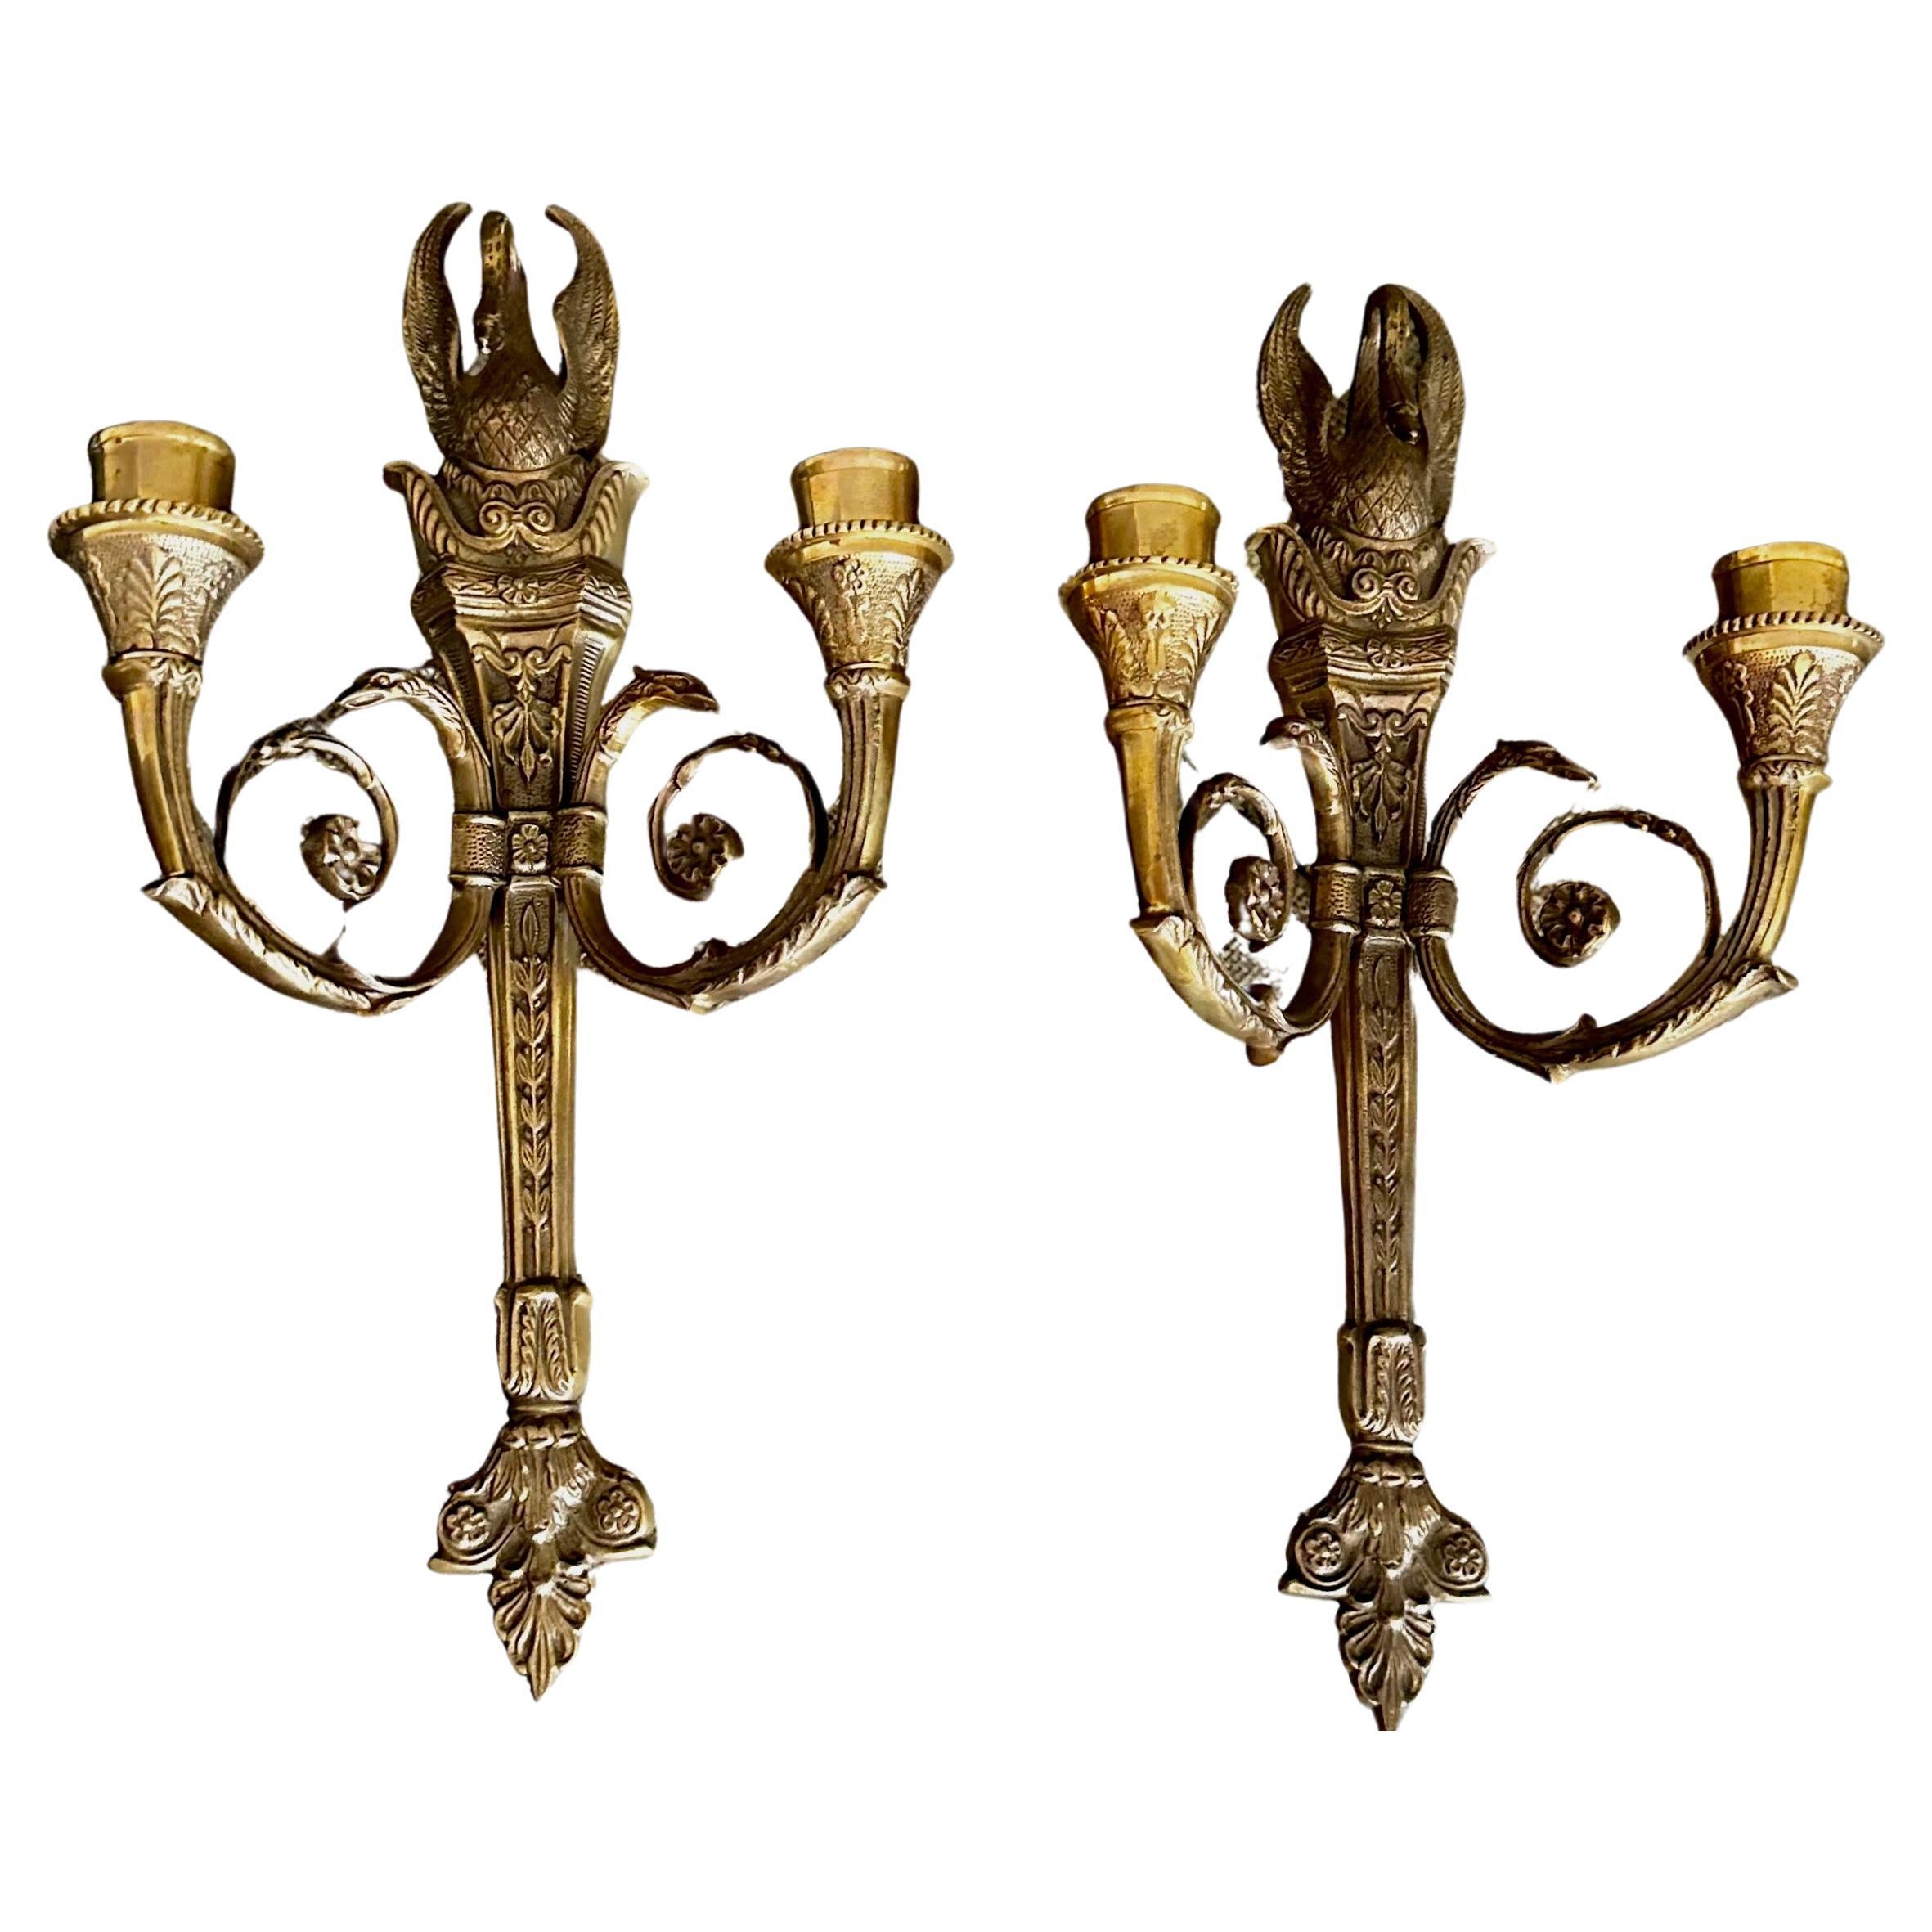 Pair French Empire Style Swan Candle Wall Sconces